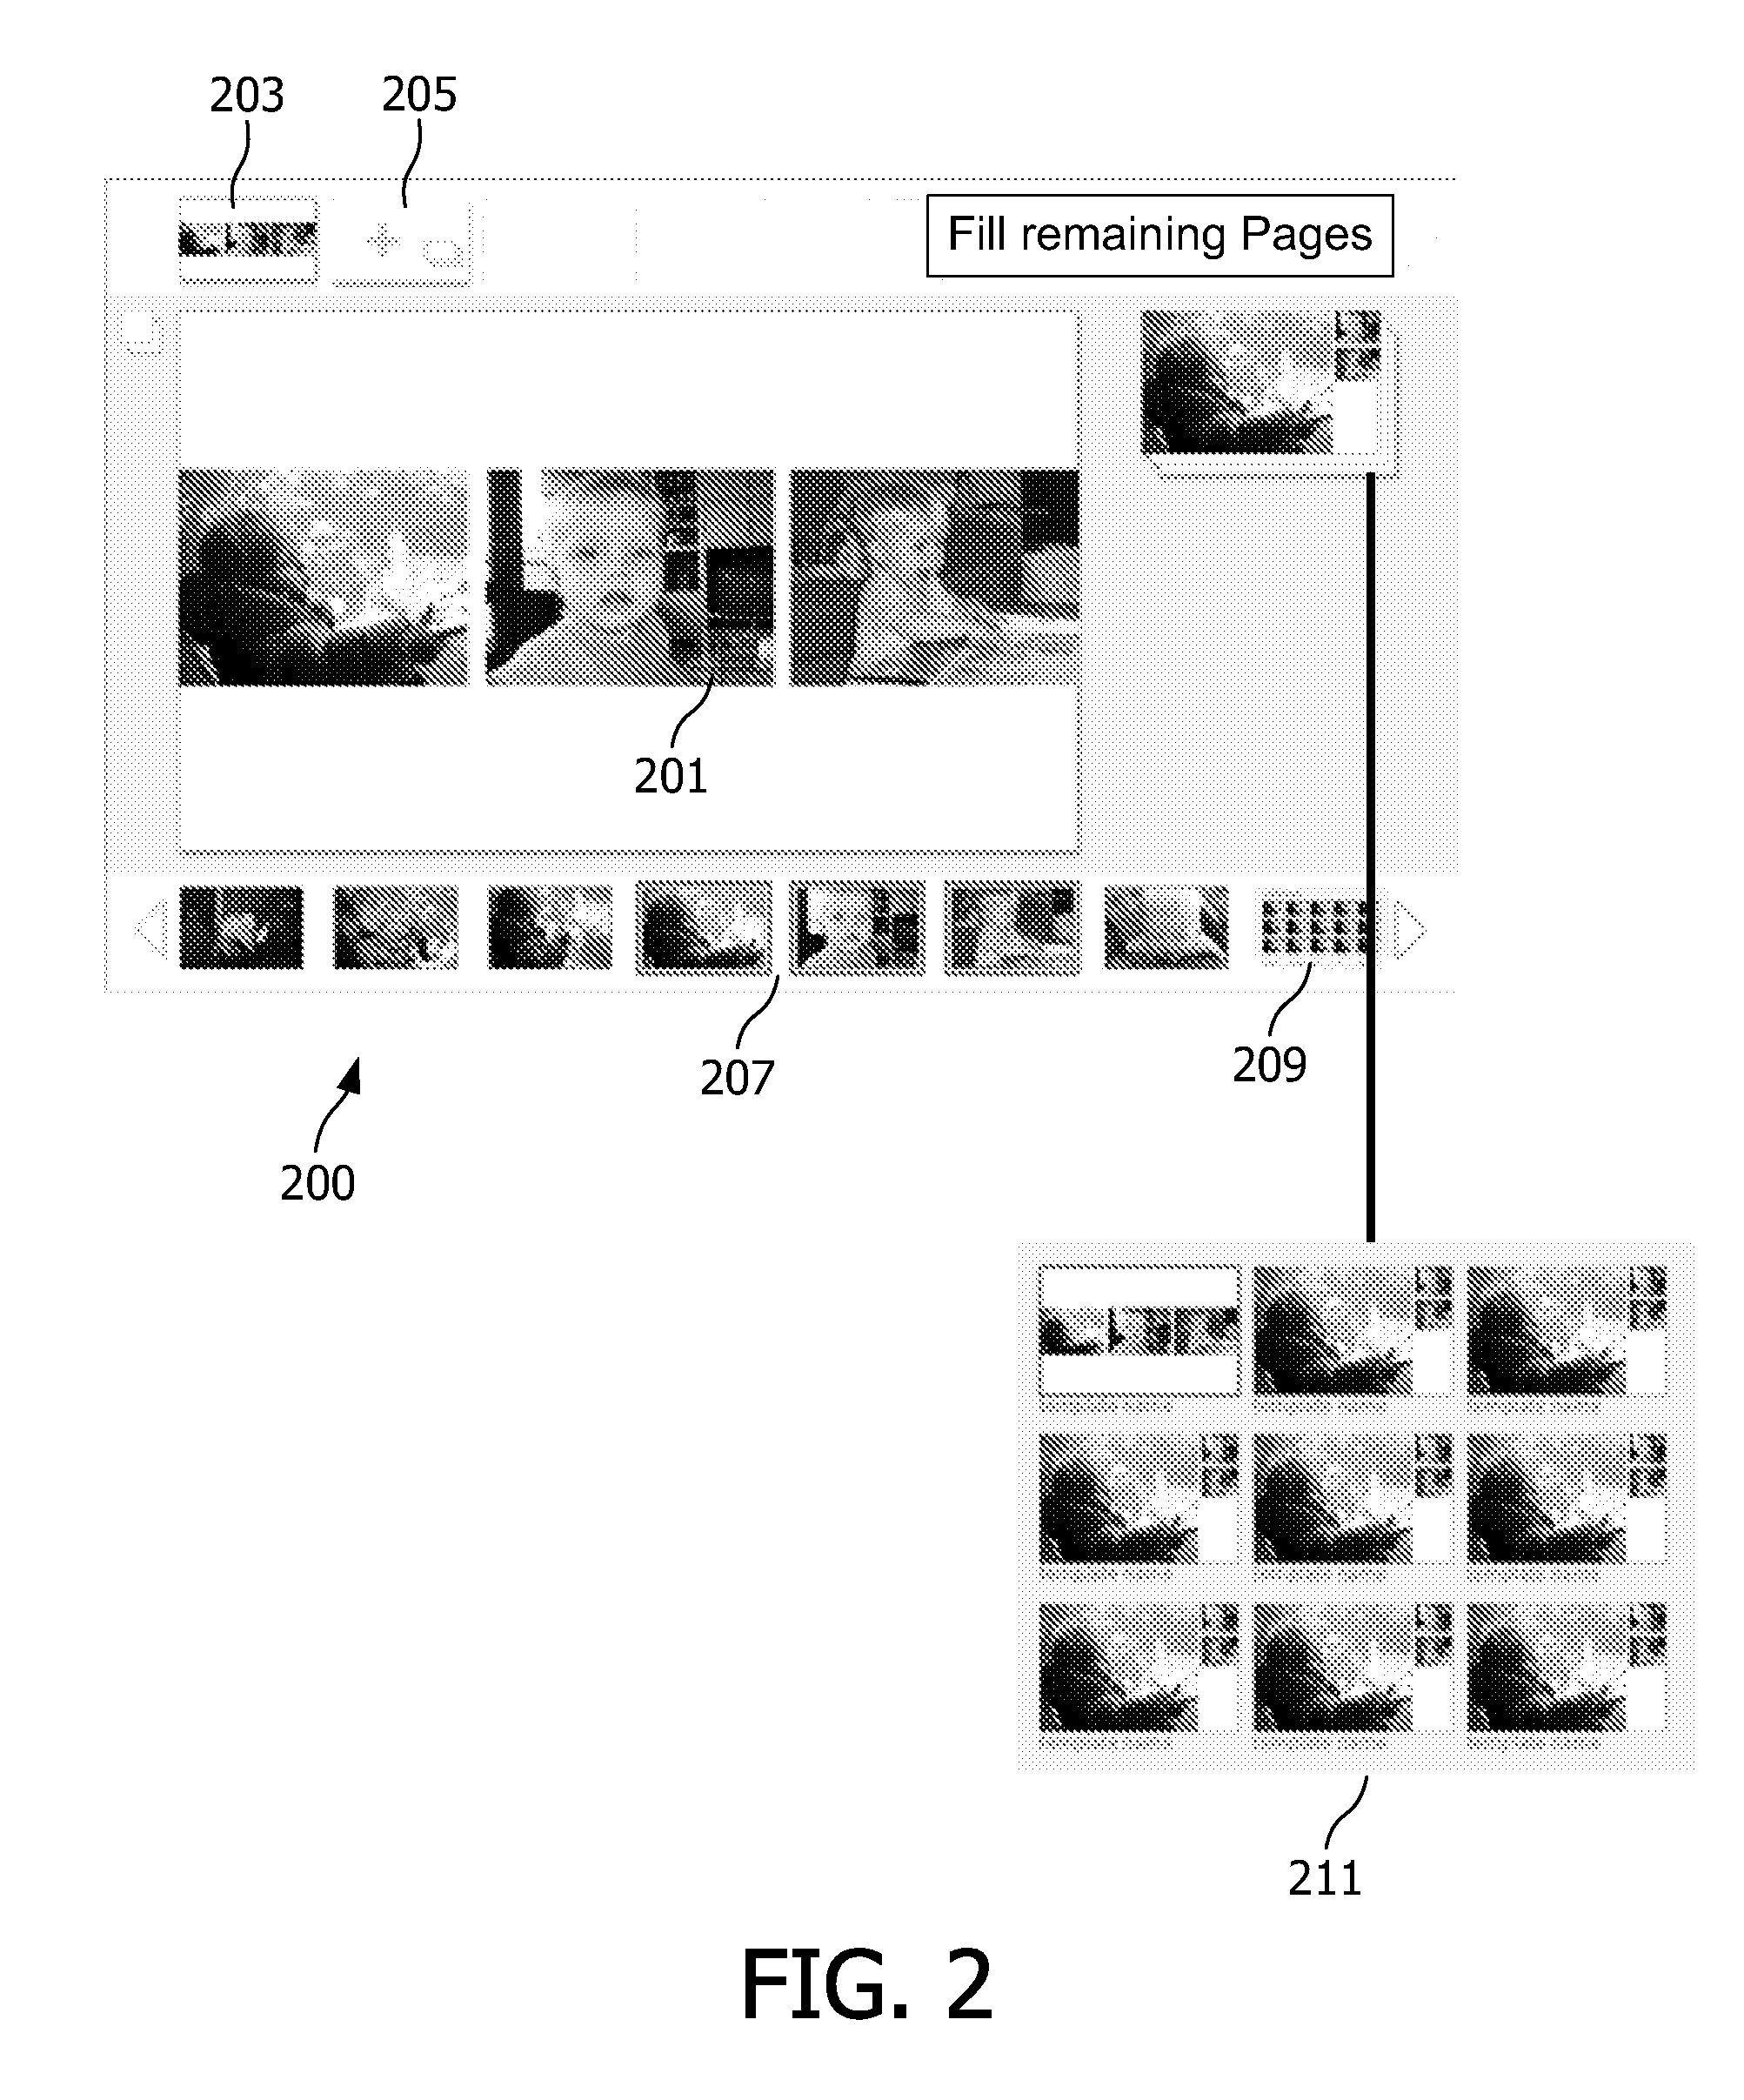 Method and apparatus for generating an album of images